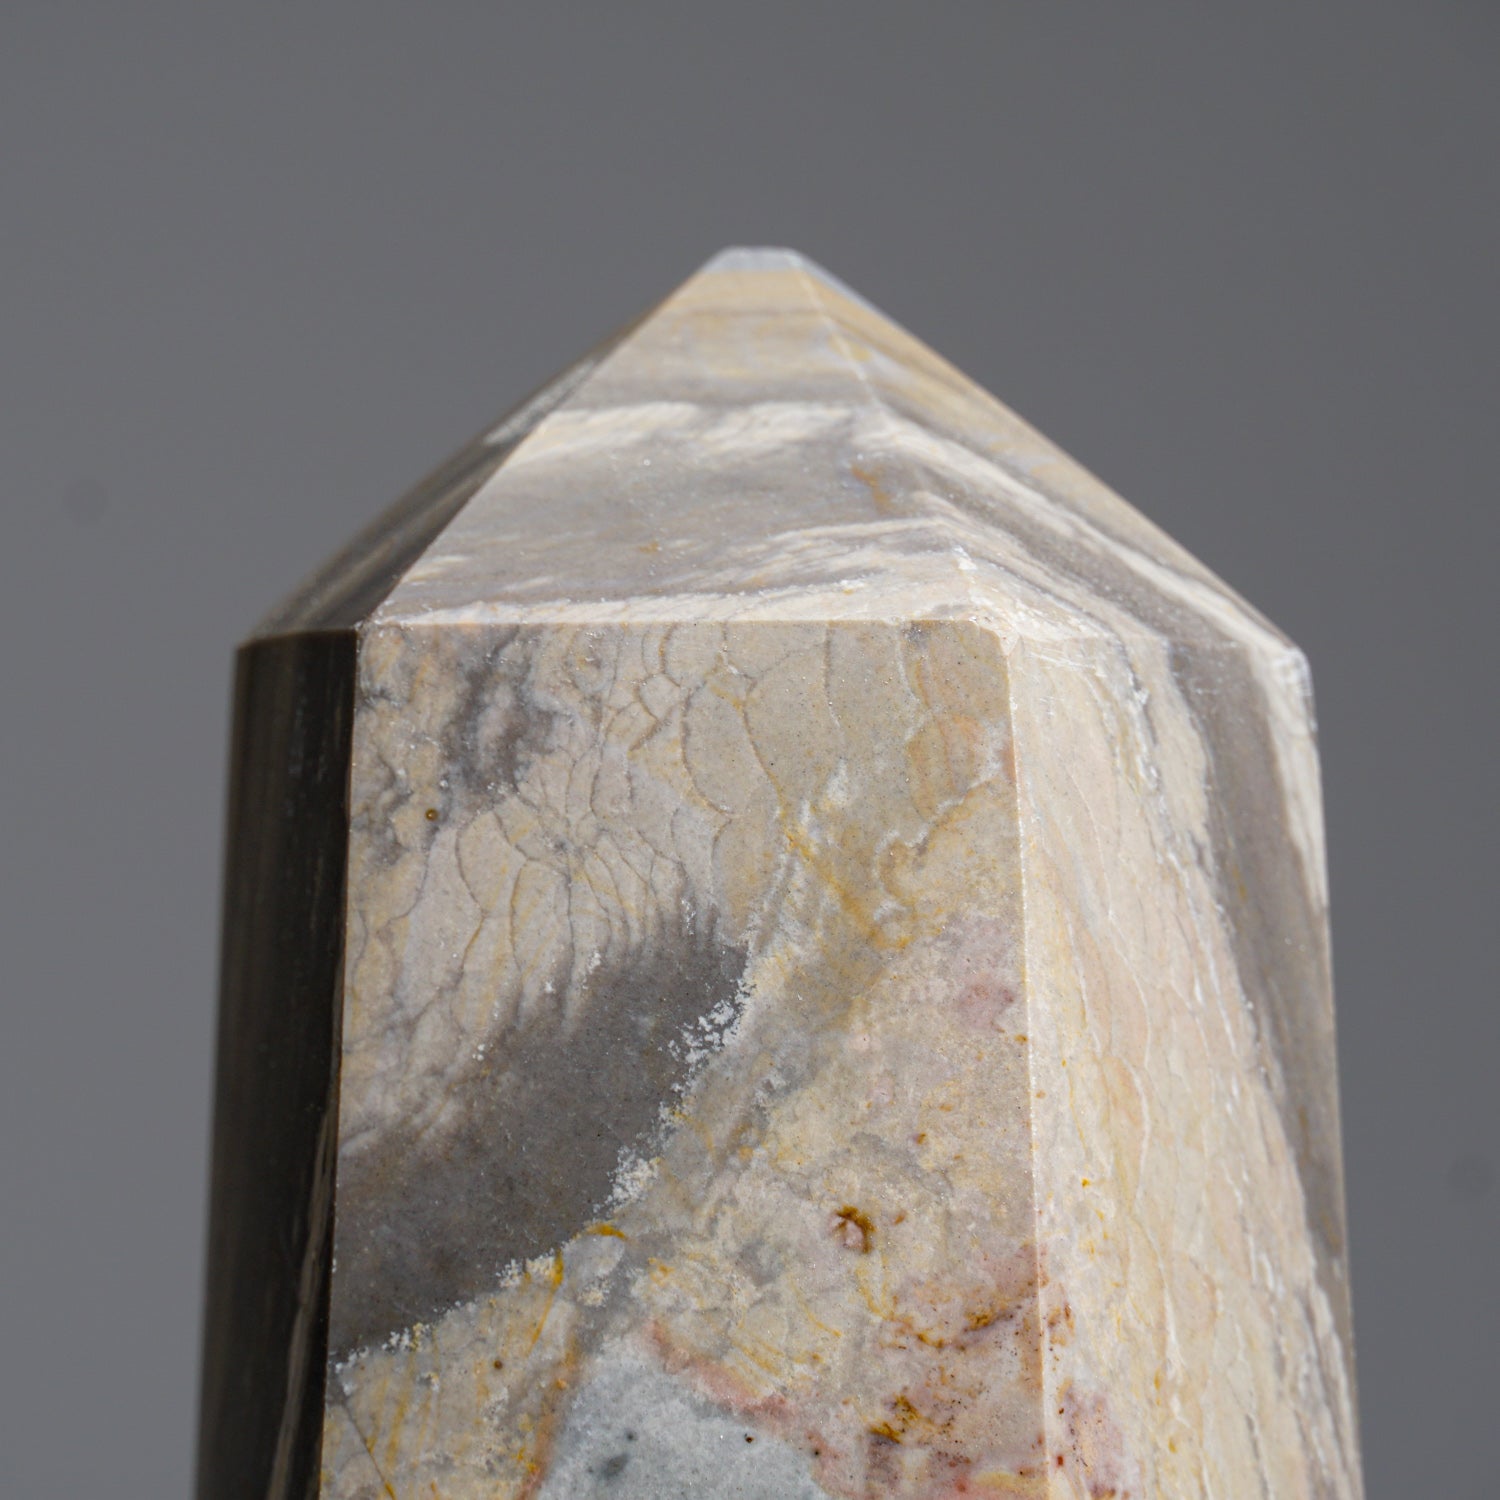 Polished Polychrome Point from Madagascar (2 lbs)